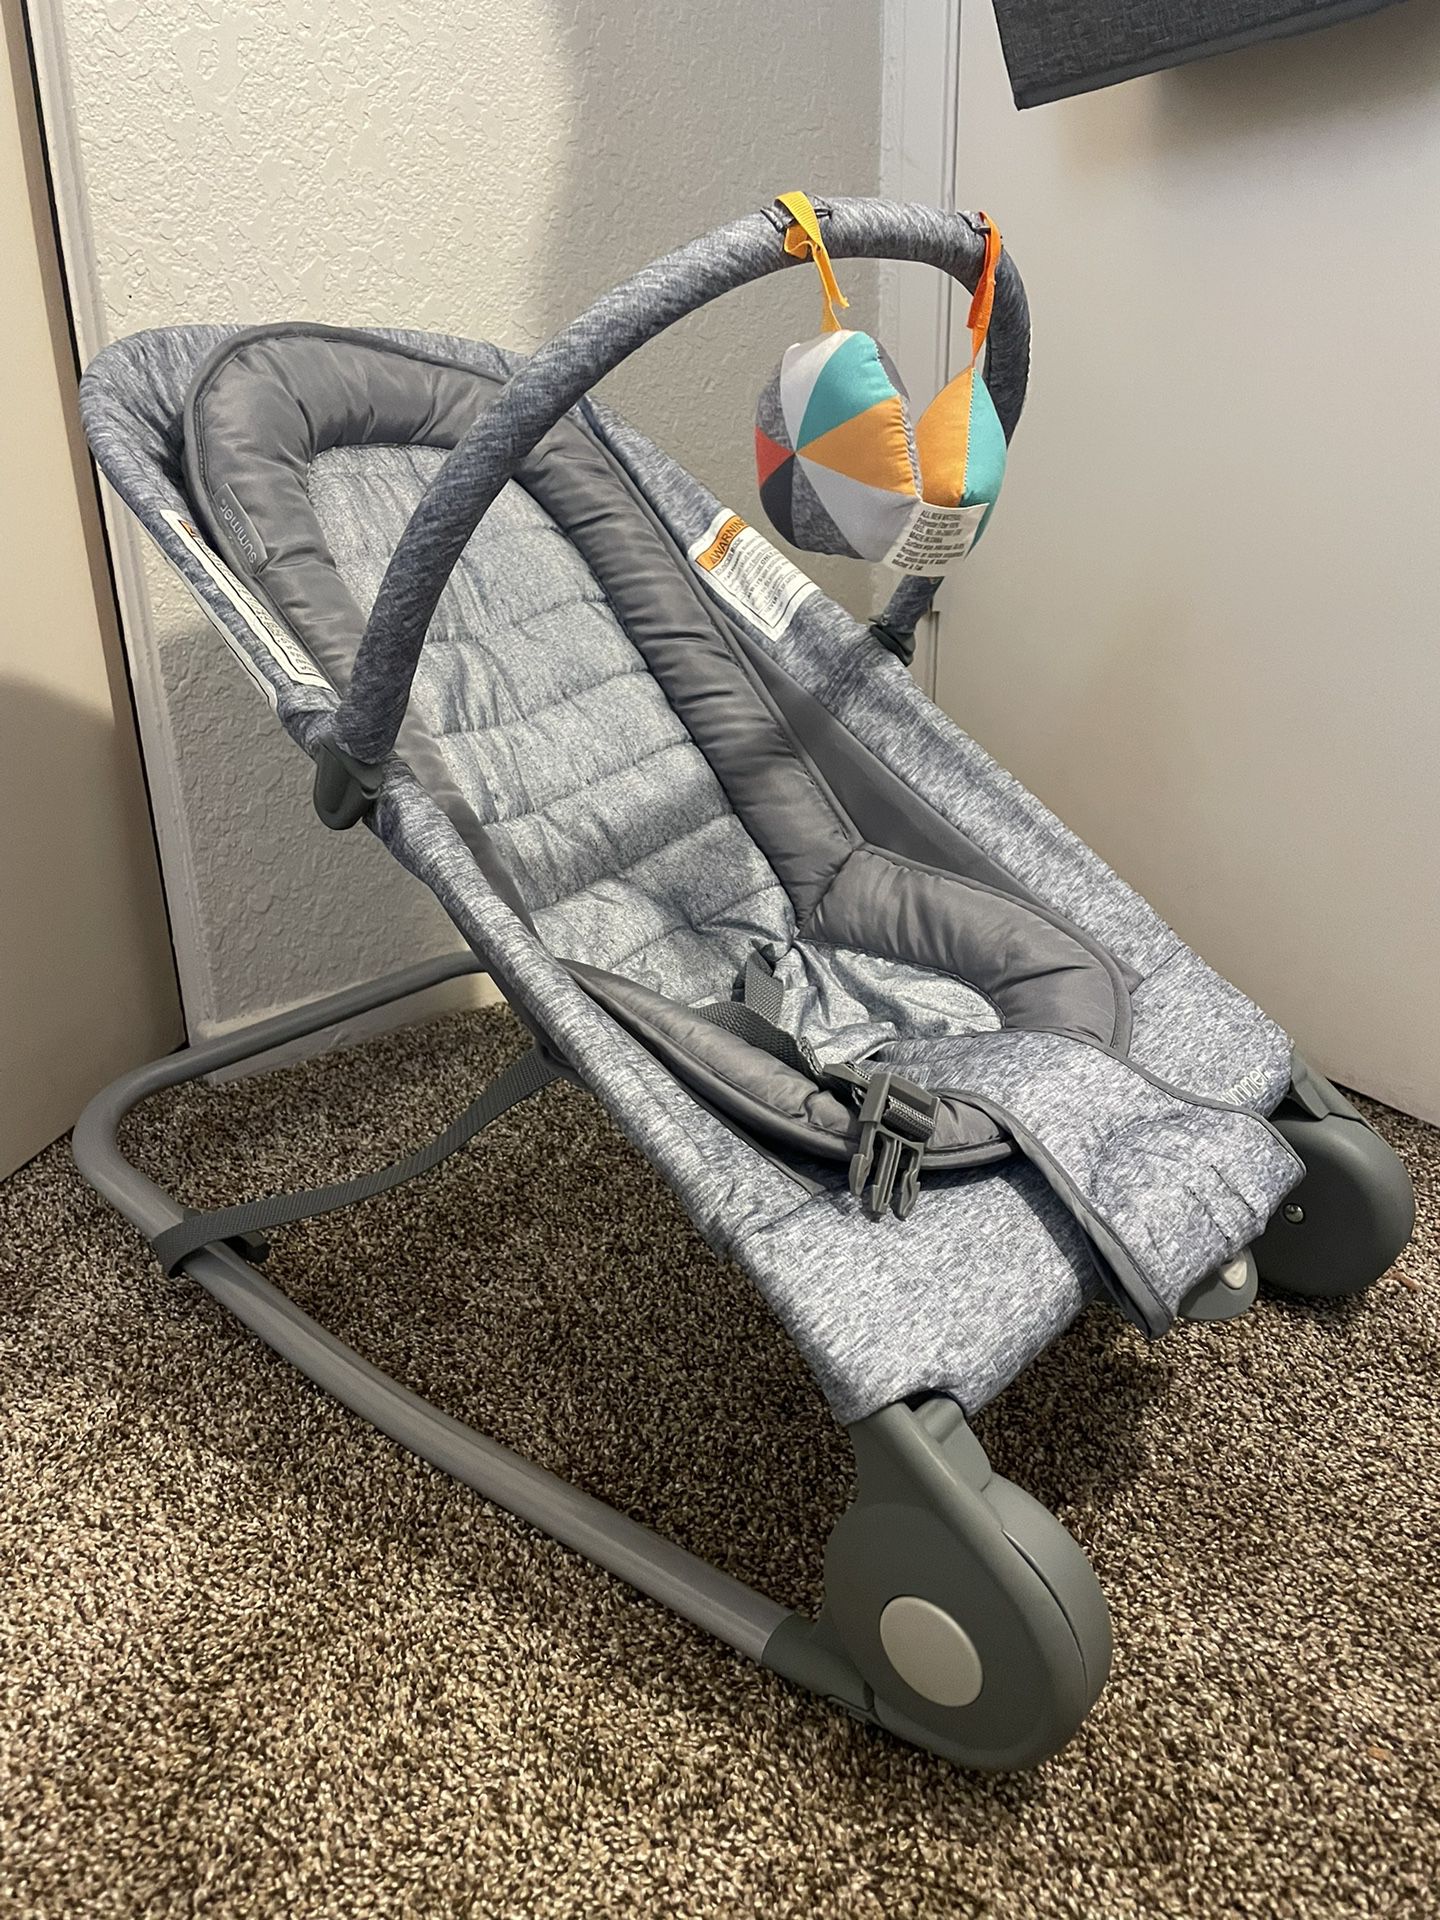 Baby Chair/Bouncer